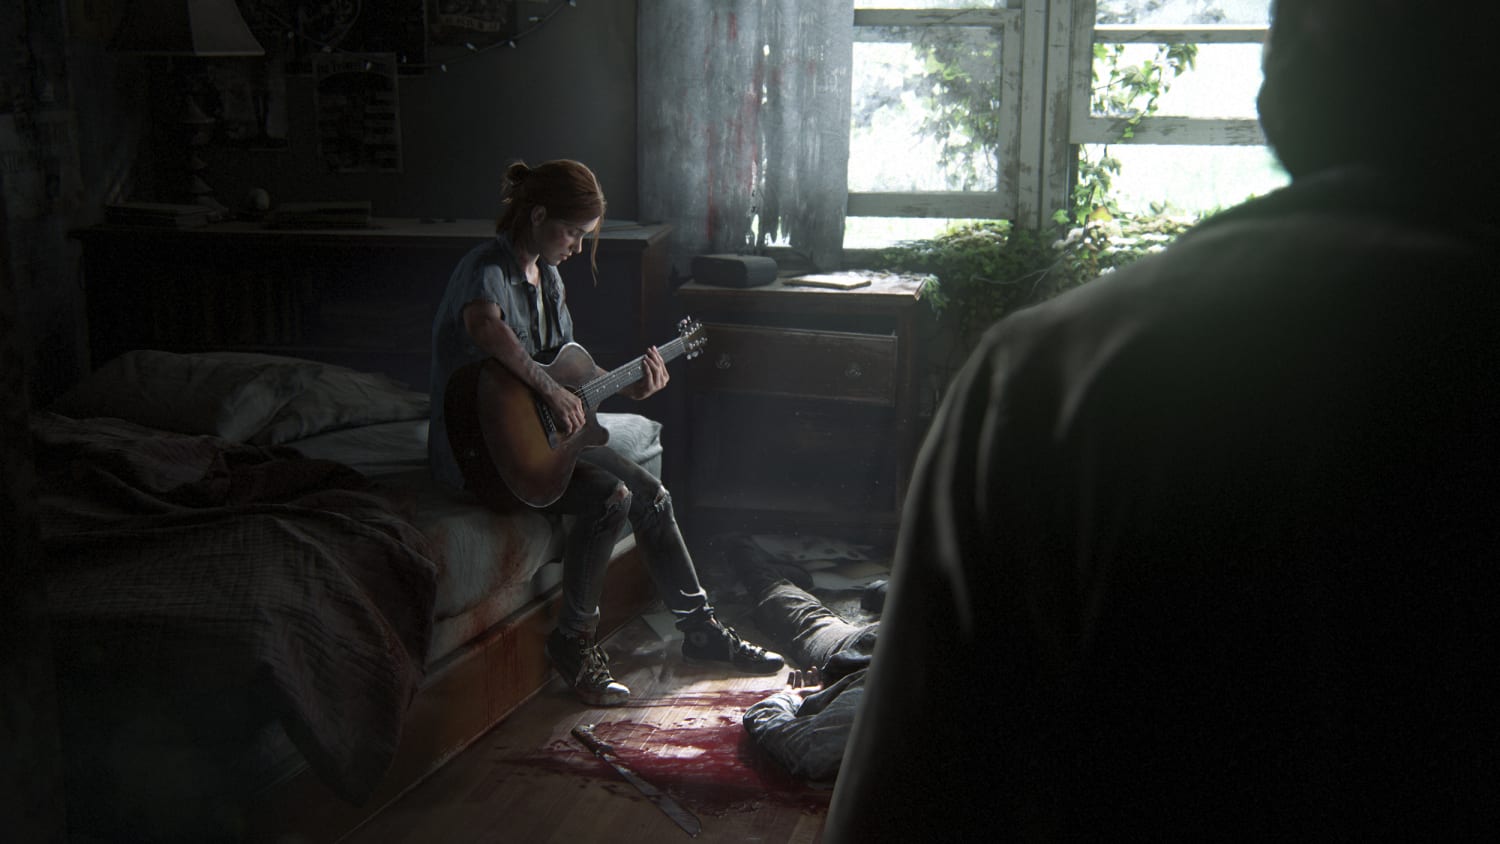 The Last of Us Part 2: Transgender character causes concern